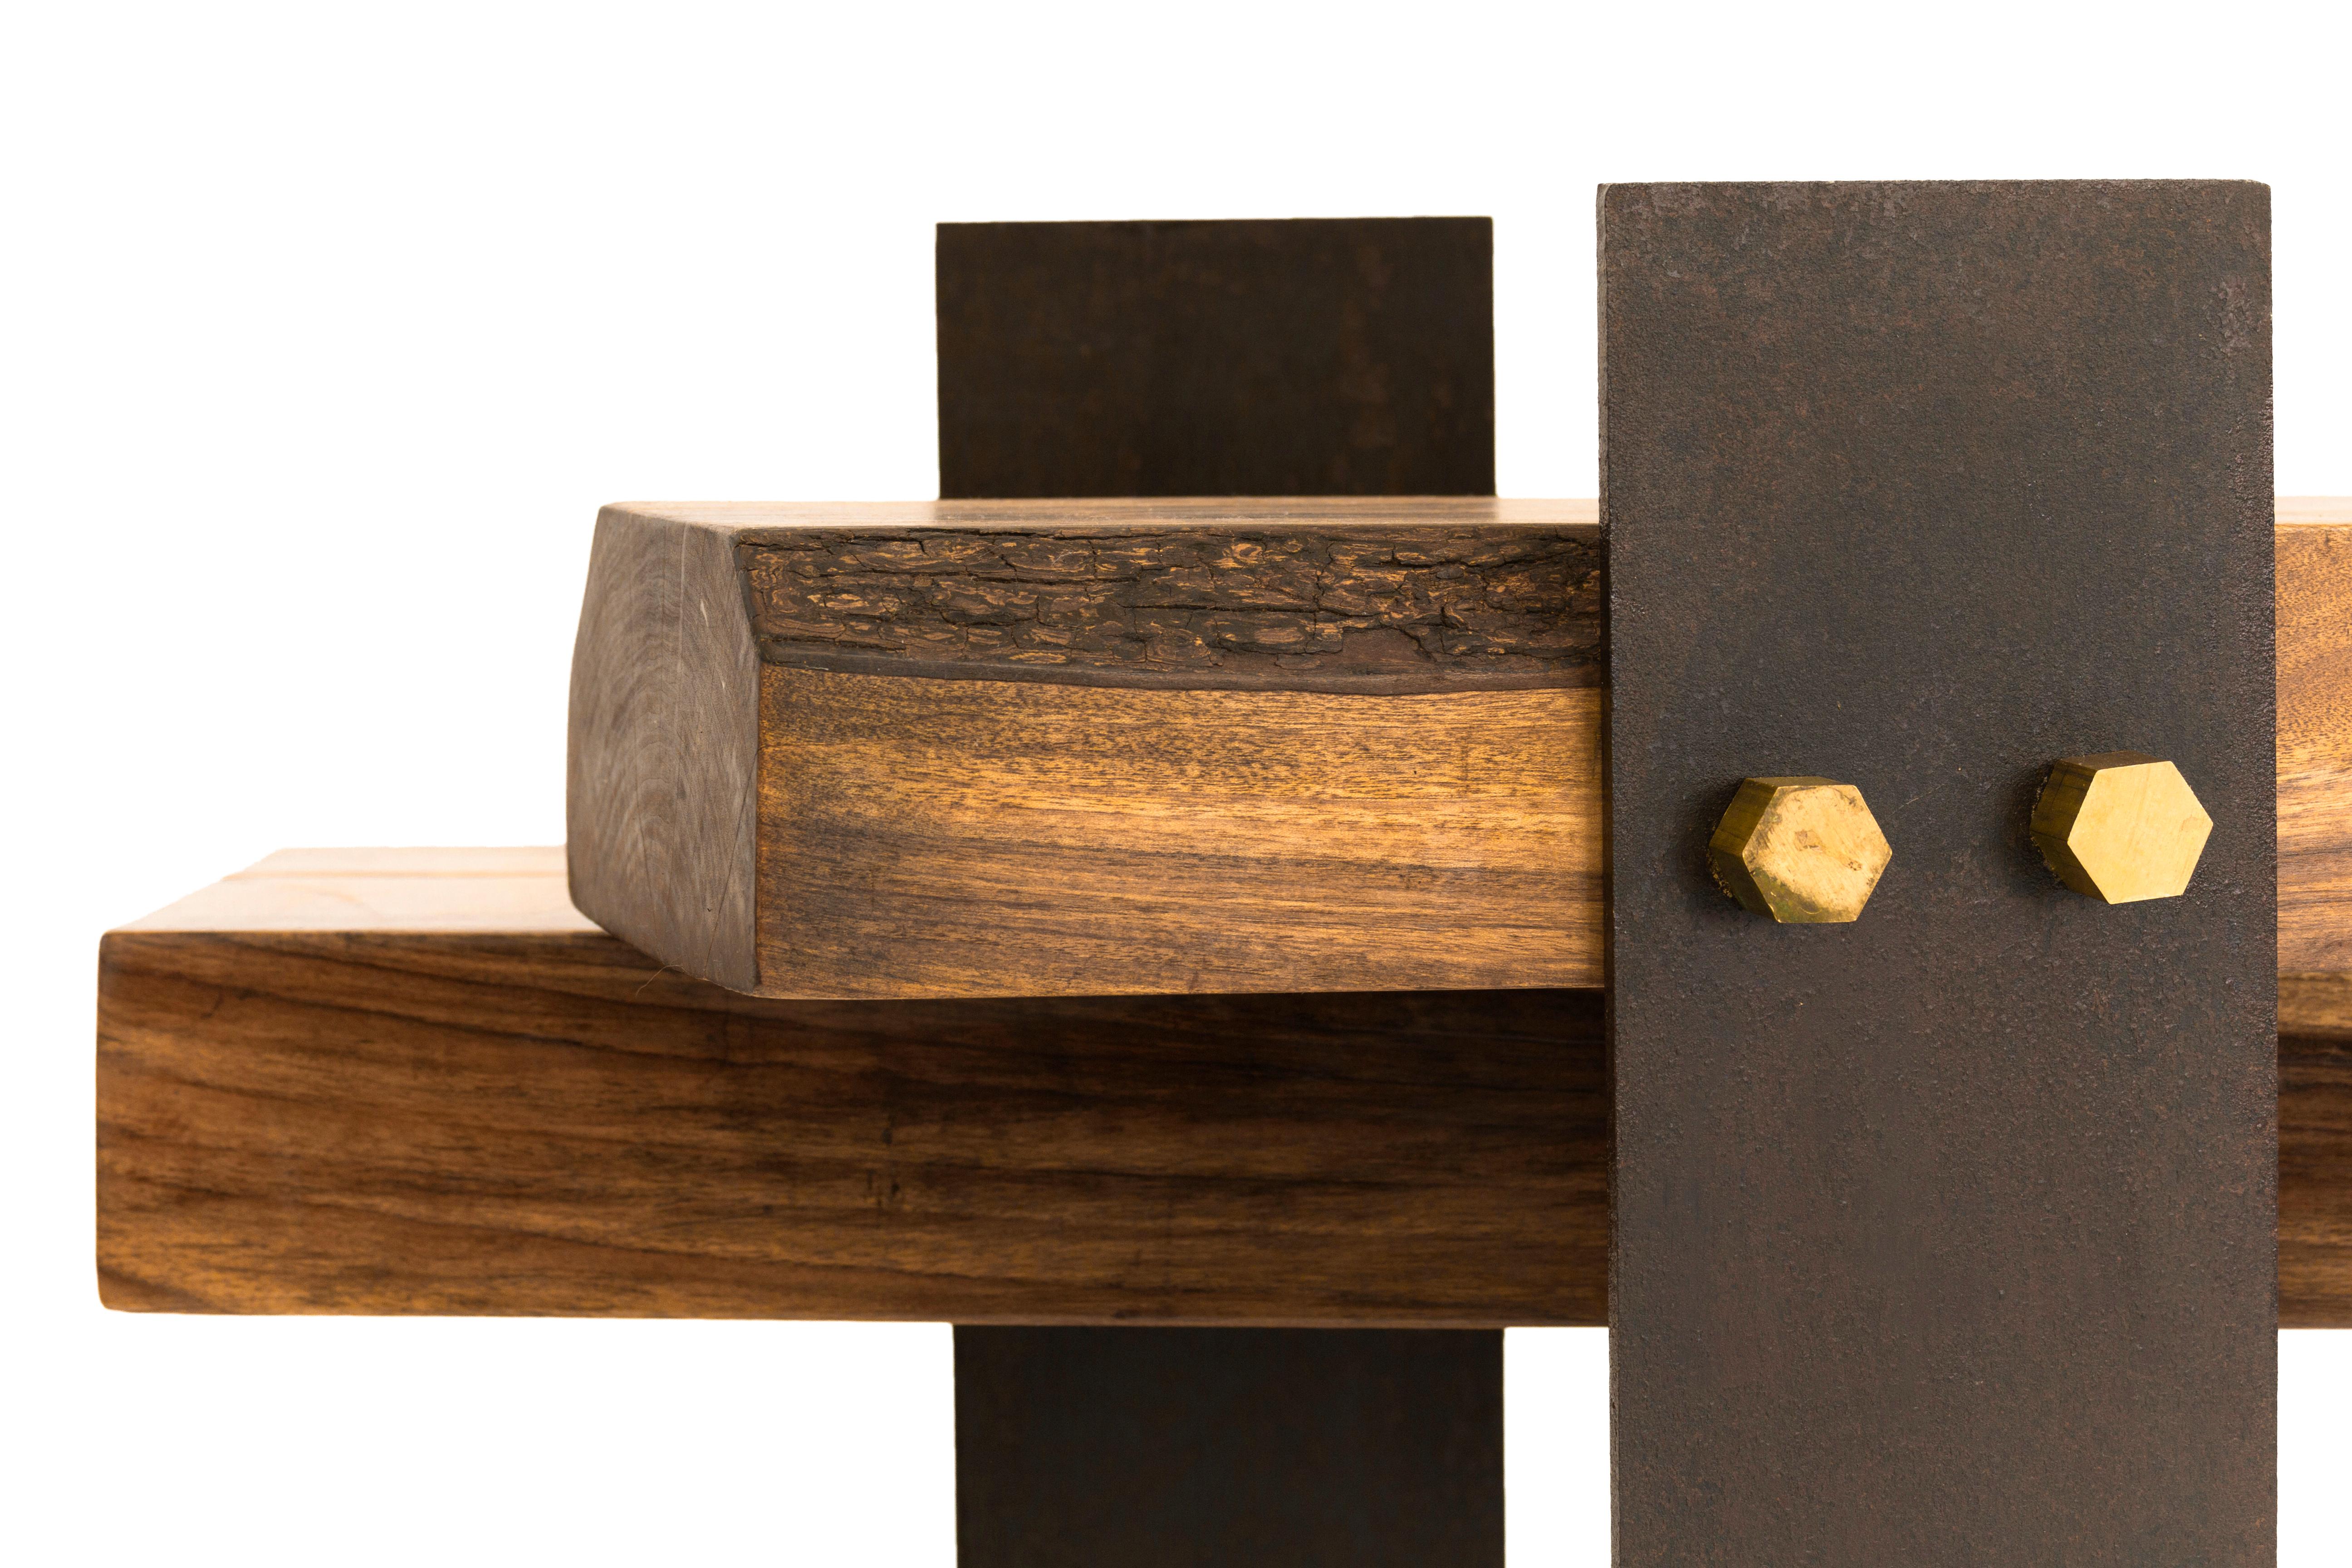 Hand-Crafted Encrucijada: Unique Capa Prieto Dining Table with Corten Steel & Brass For Sale